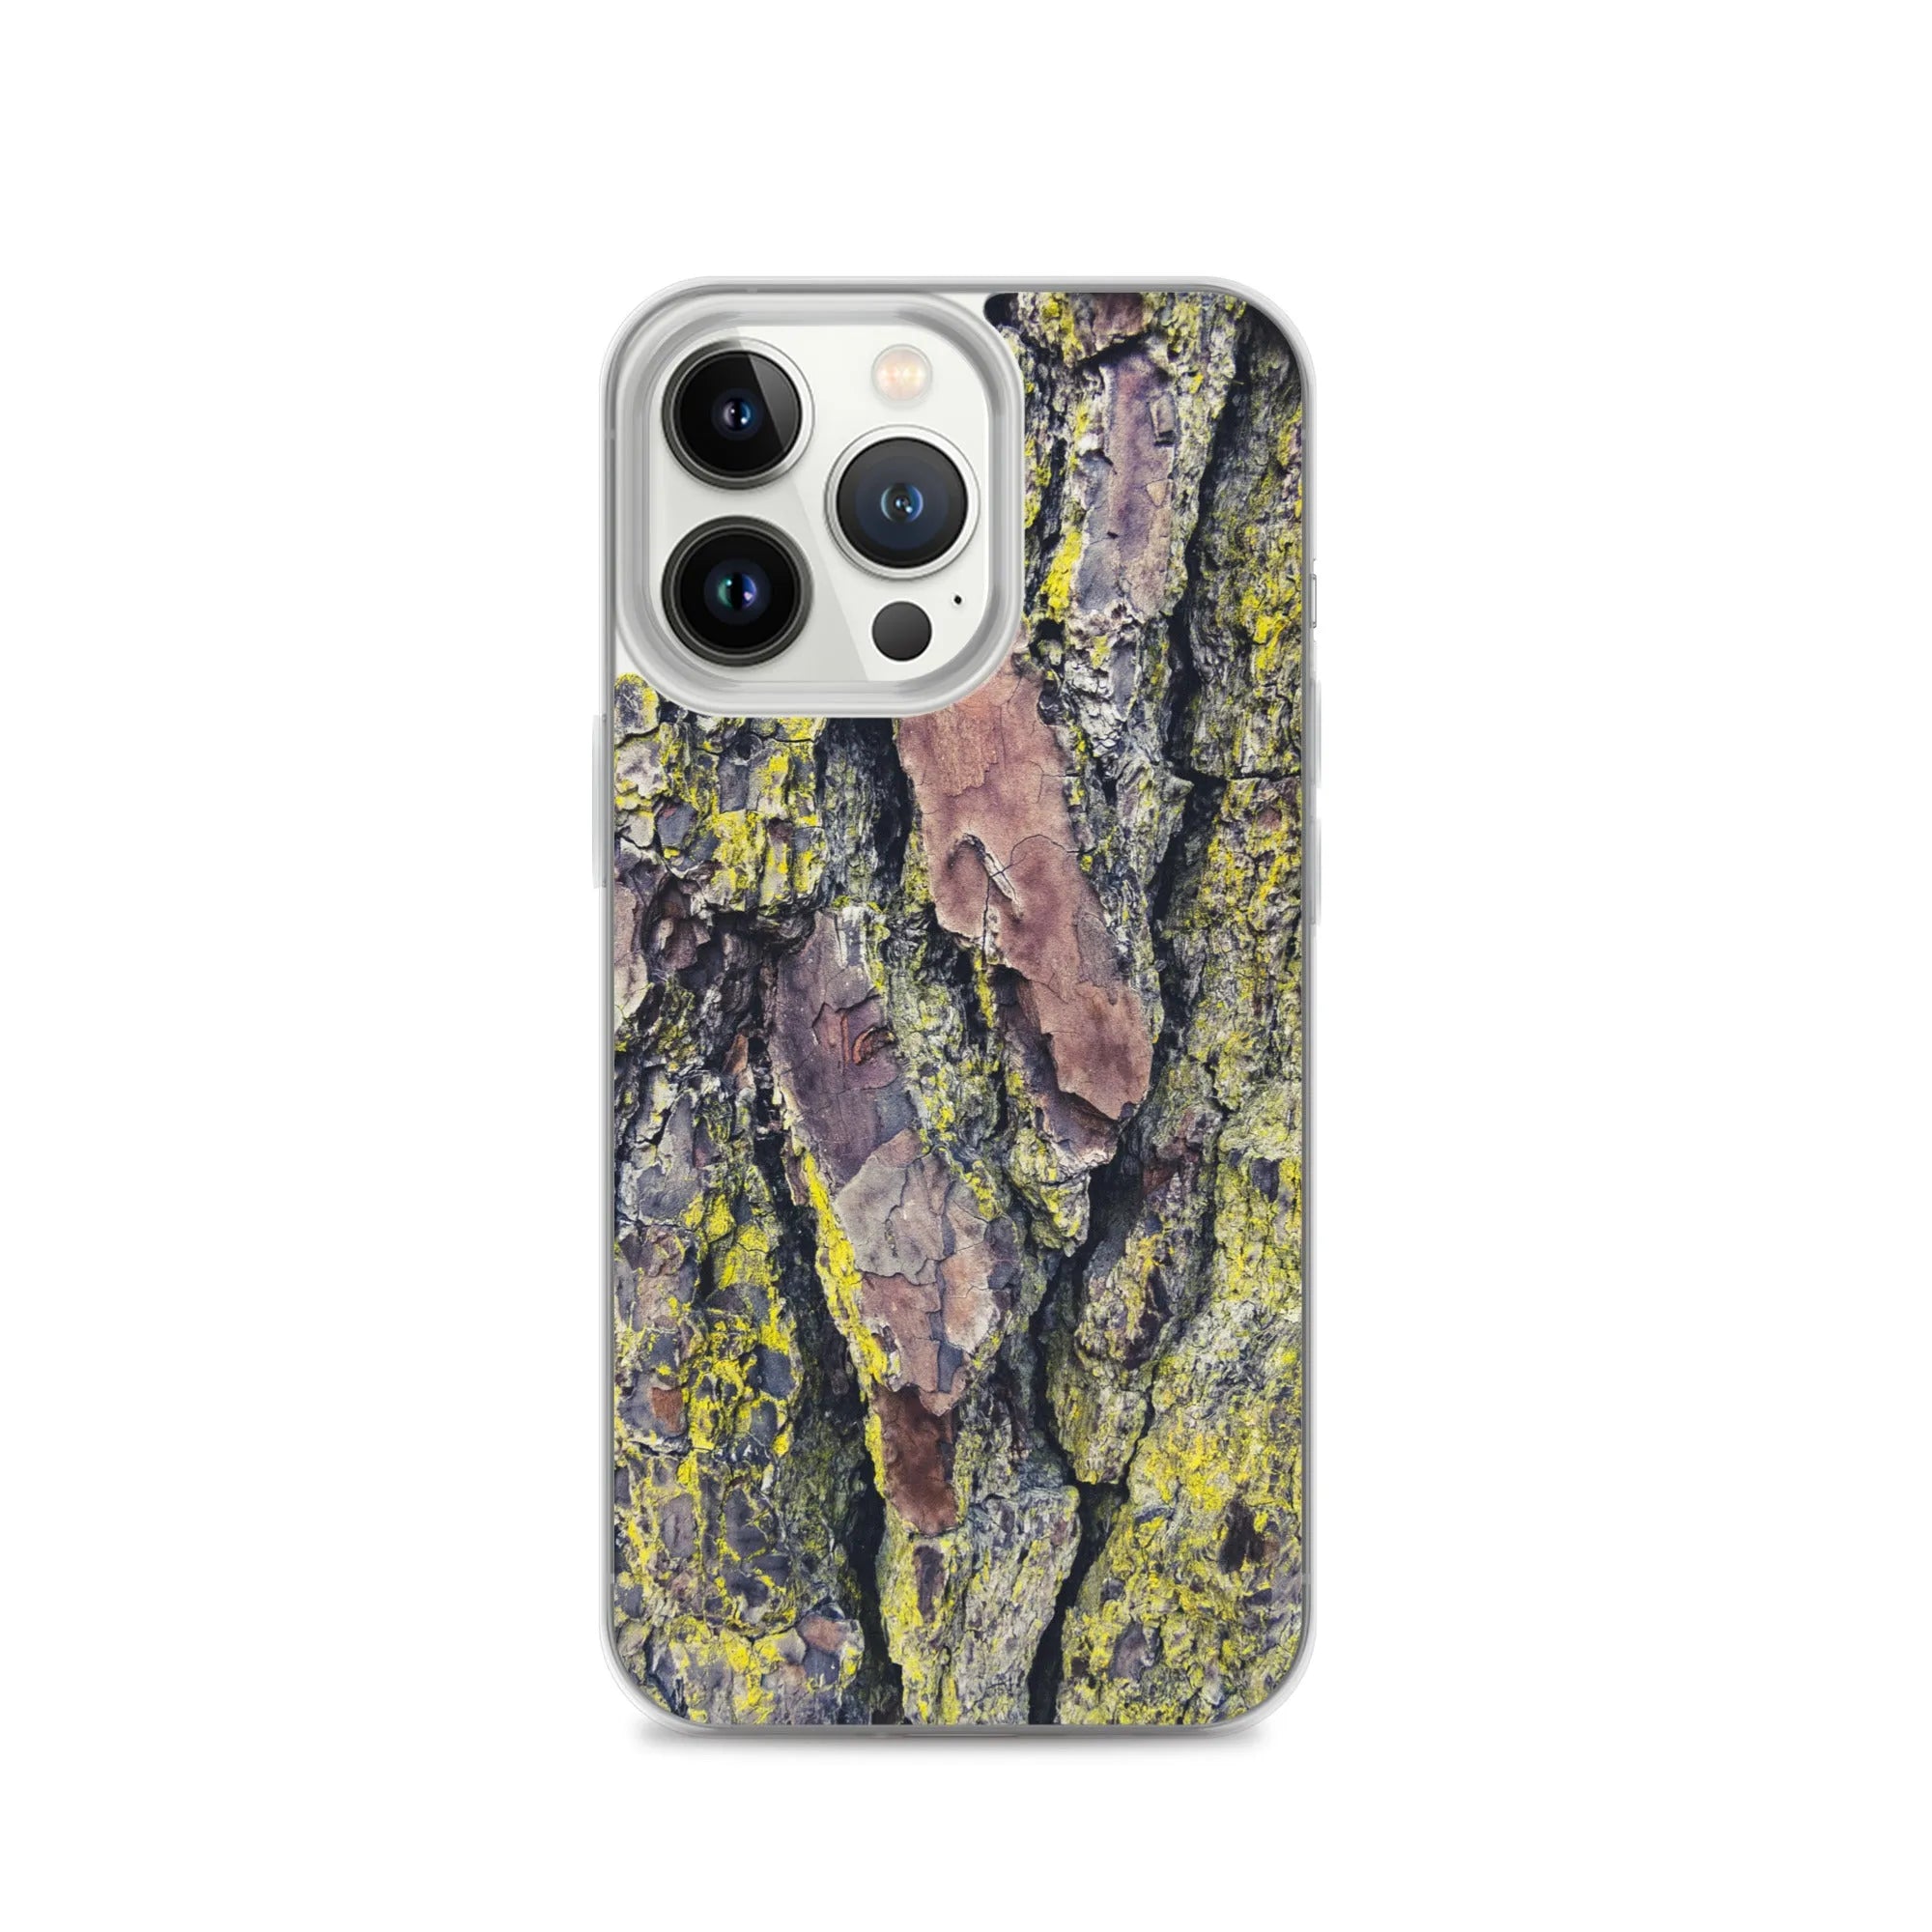 Barking Mad 2 + Too - Botanical Art Pattern Iphone Case - Iphone 13 Pro - Mobile Phone Cases - Aesthetic Art